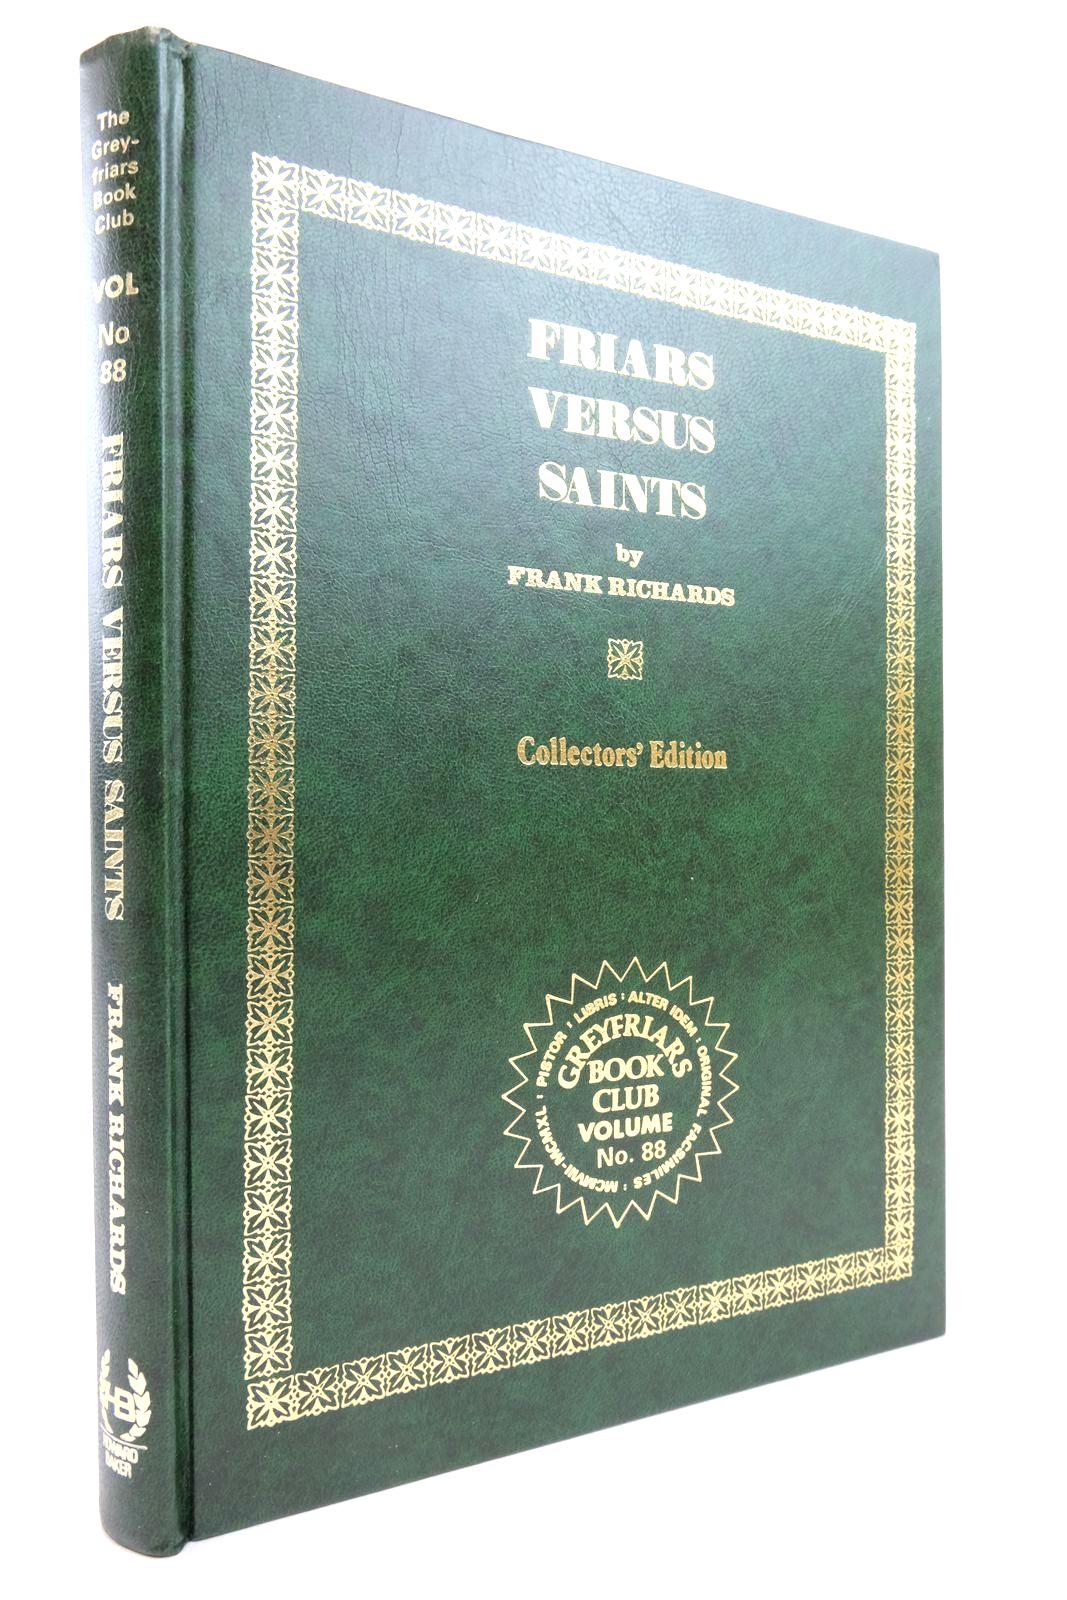 Photo of FRIARS VERSUS SAINTS written by Richards, Frank published by Howard Baker (STOCK CODE: 2136638)  for sale by Stella & Rose's Books